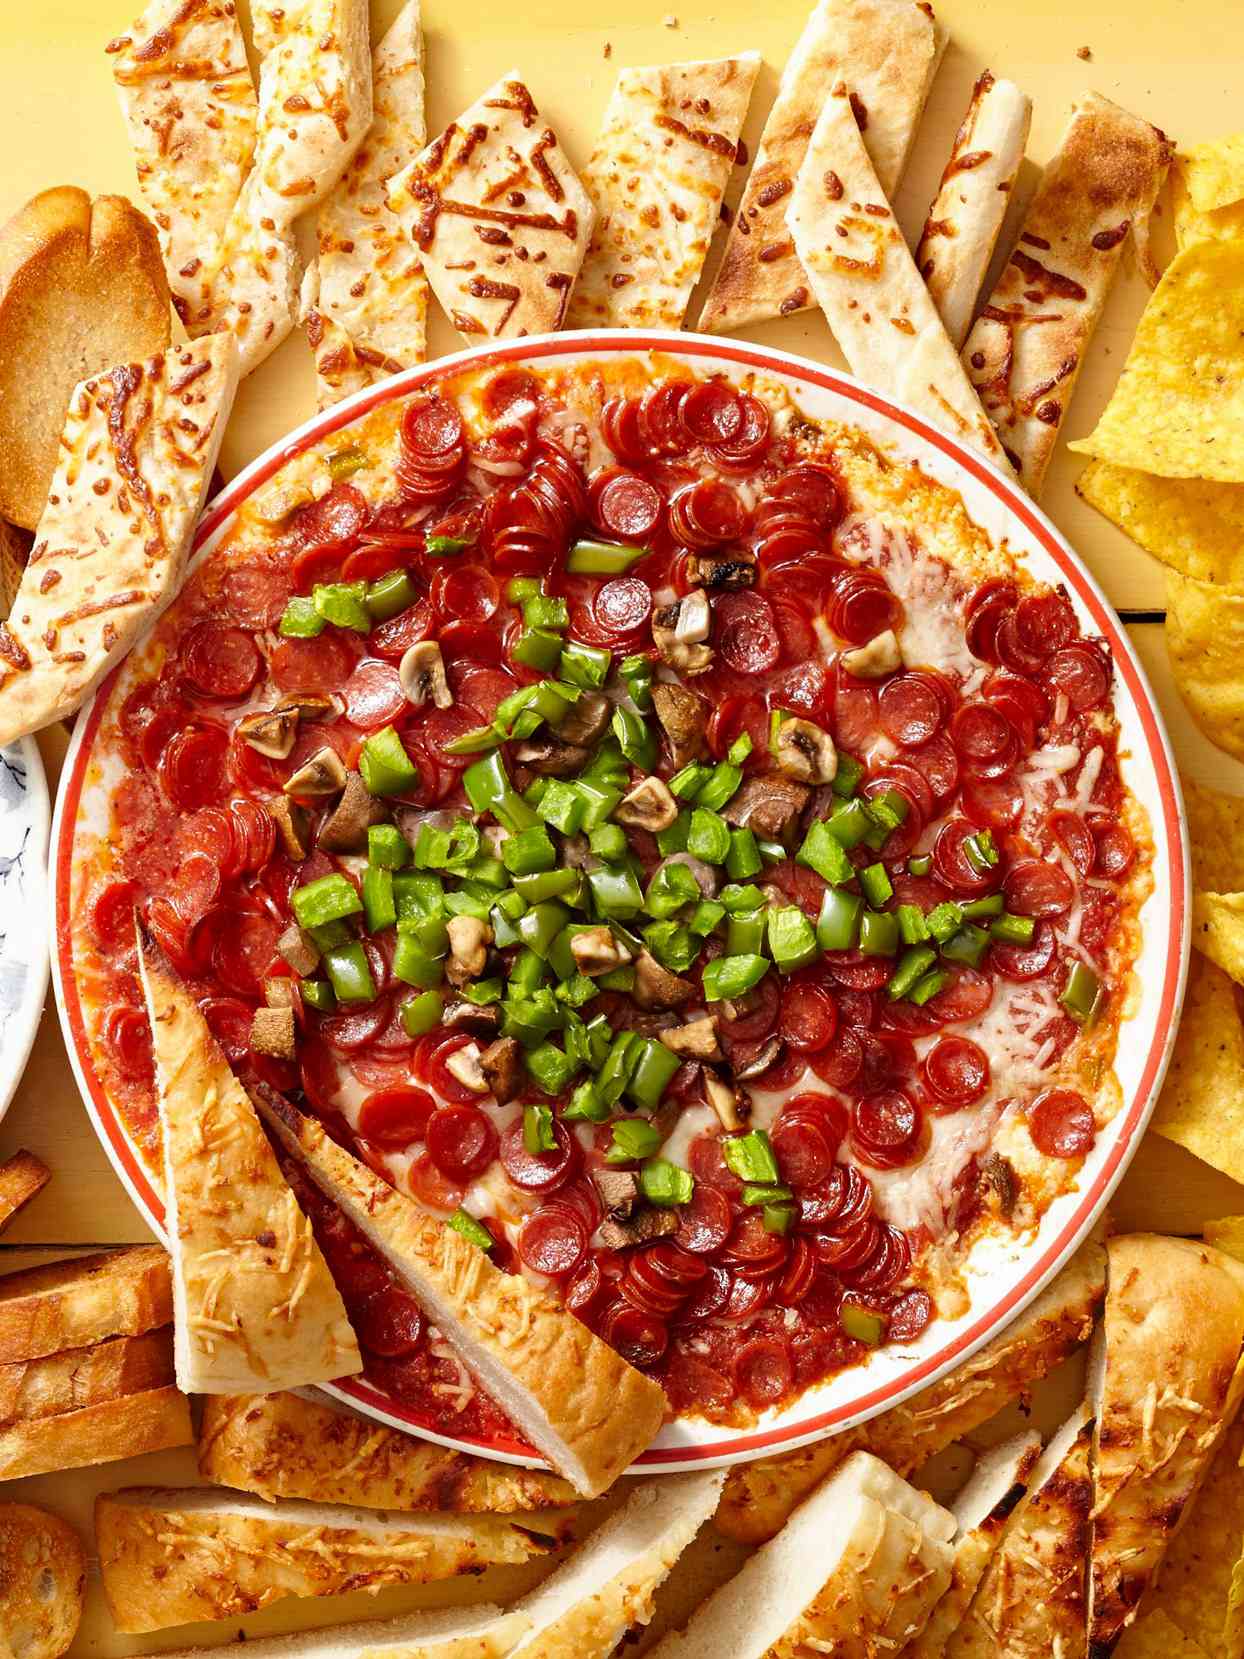 Pizza Dip with sliced bread